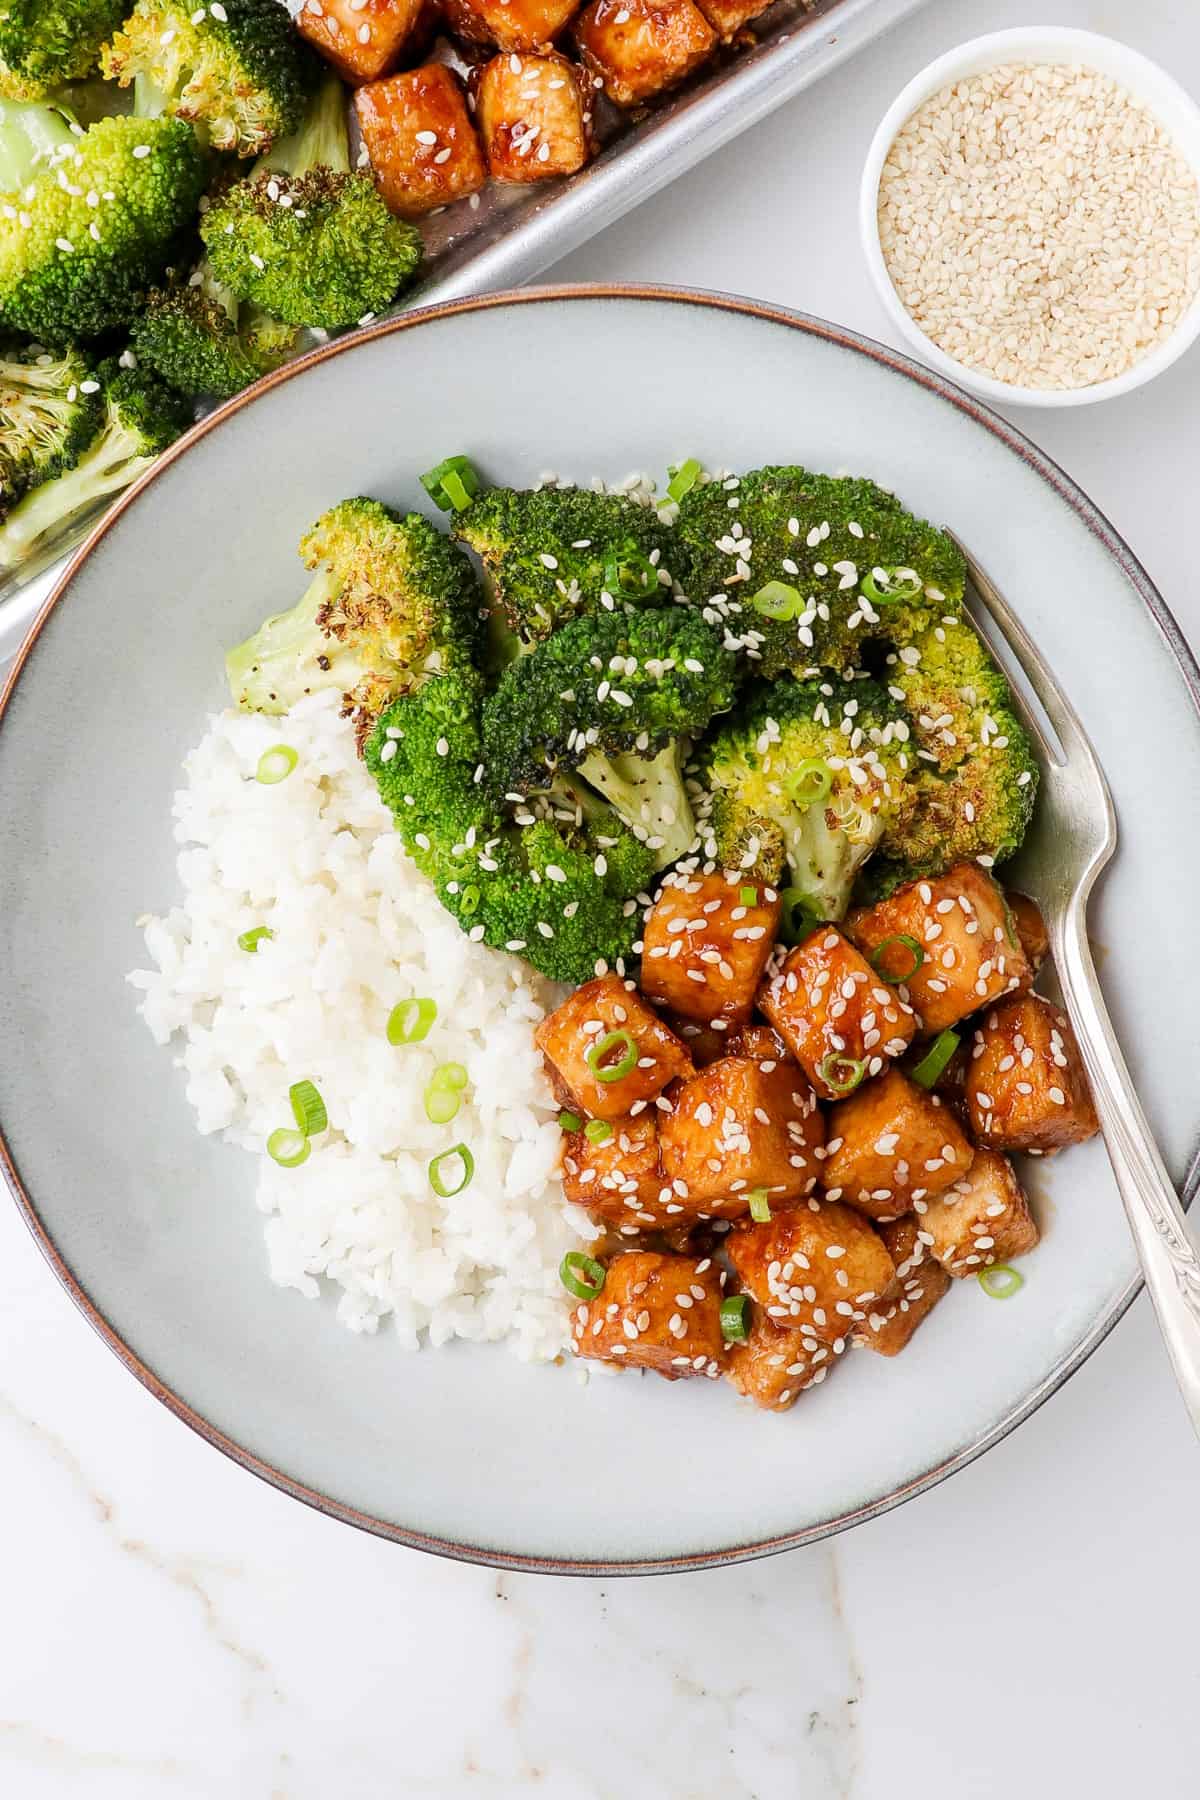 Honey garlic tofu in a bowl with roasted broccoli and rice. Sesame seeds and sheet pan on the side.